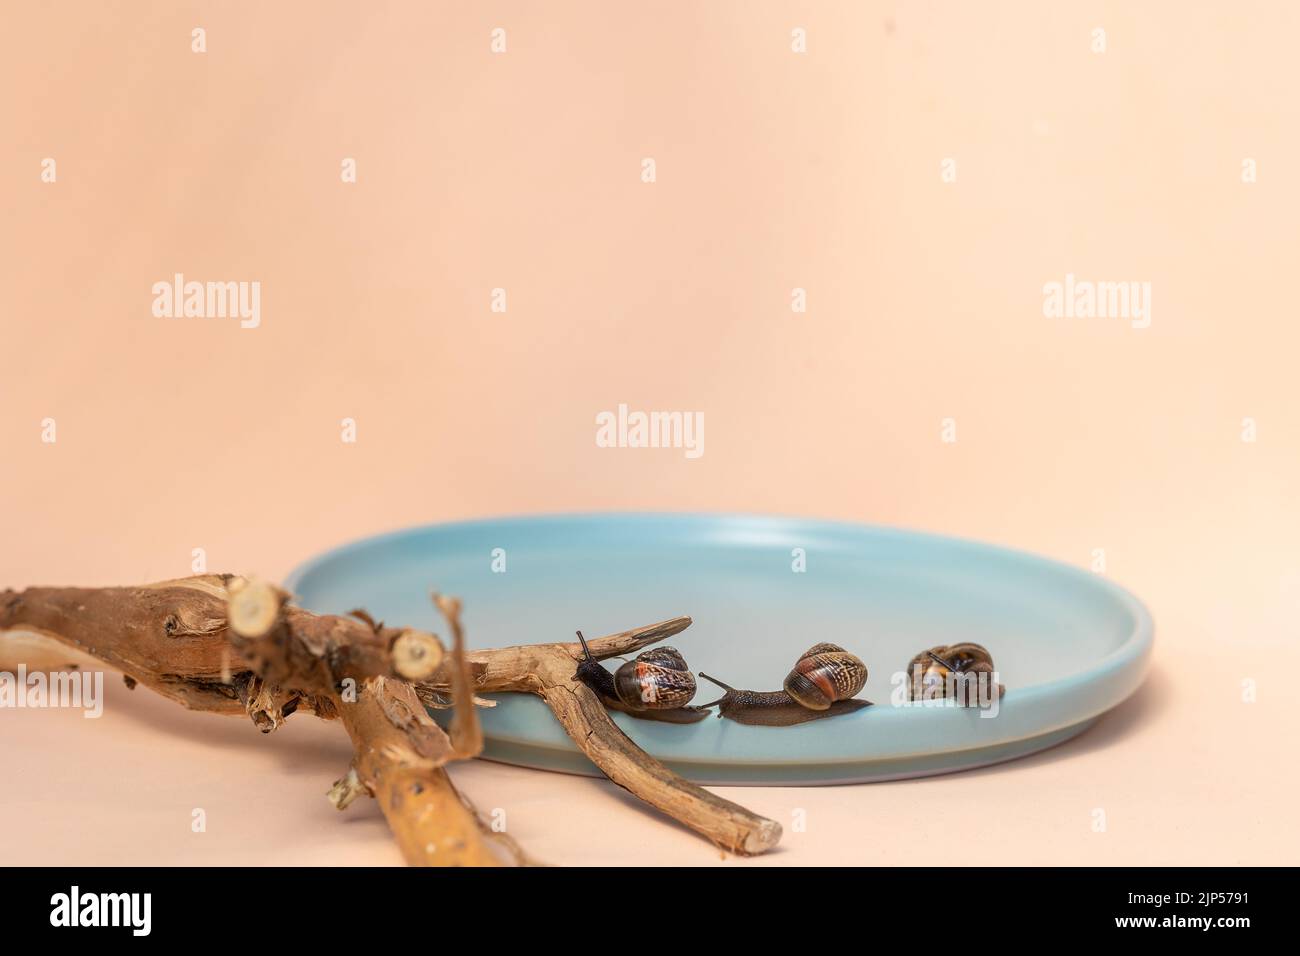 Garden snails crawling on blue plate on beige background. Beautiful shadows and eco driftwood. High quality photo Stock Photo